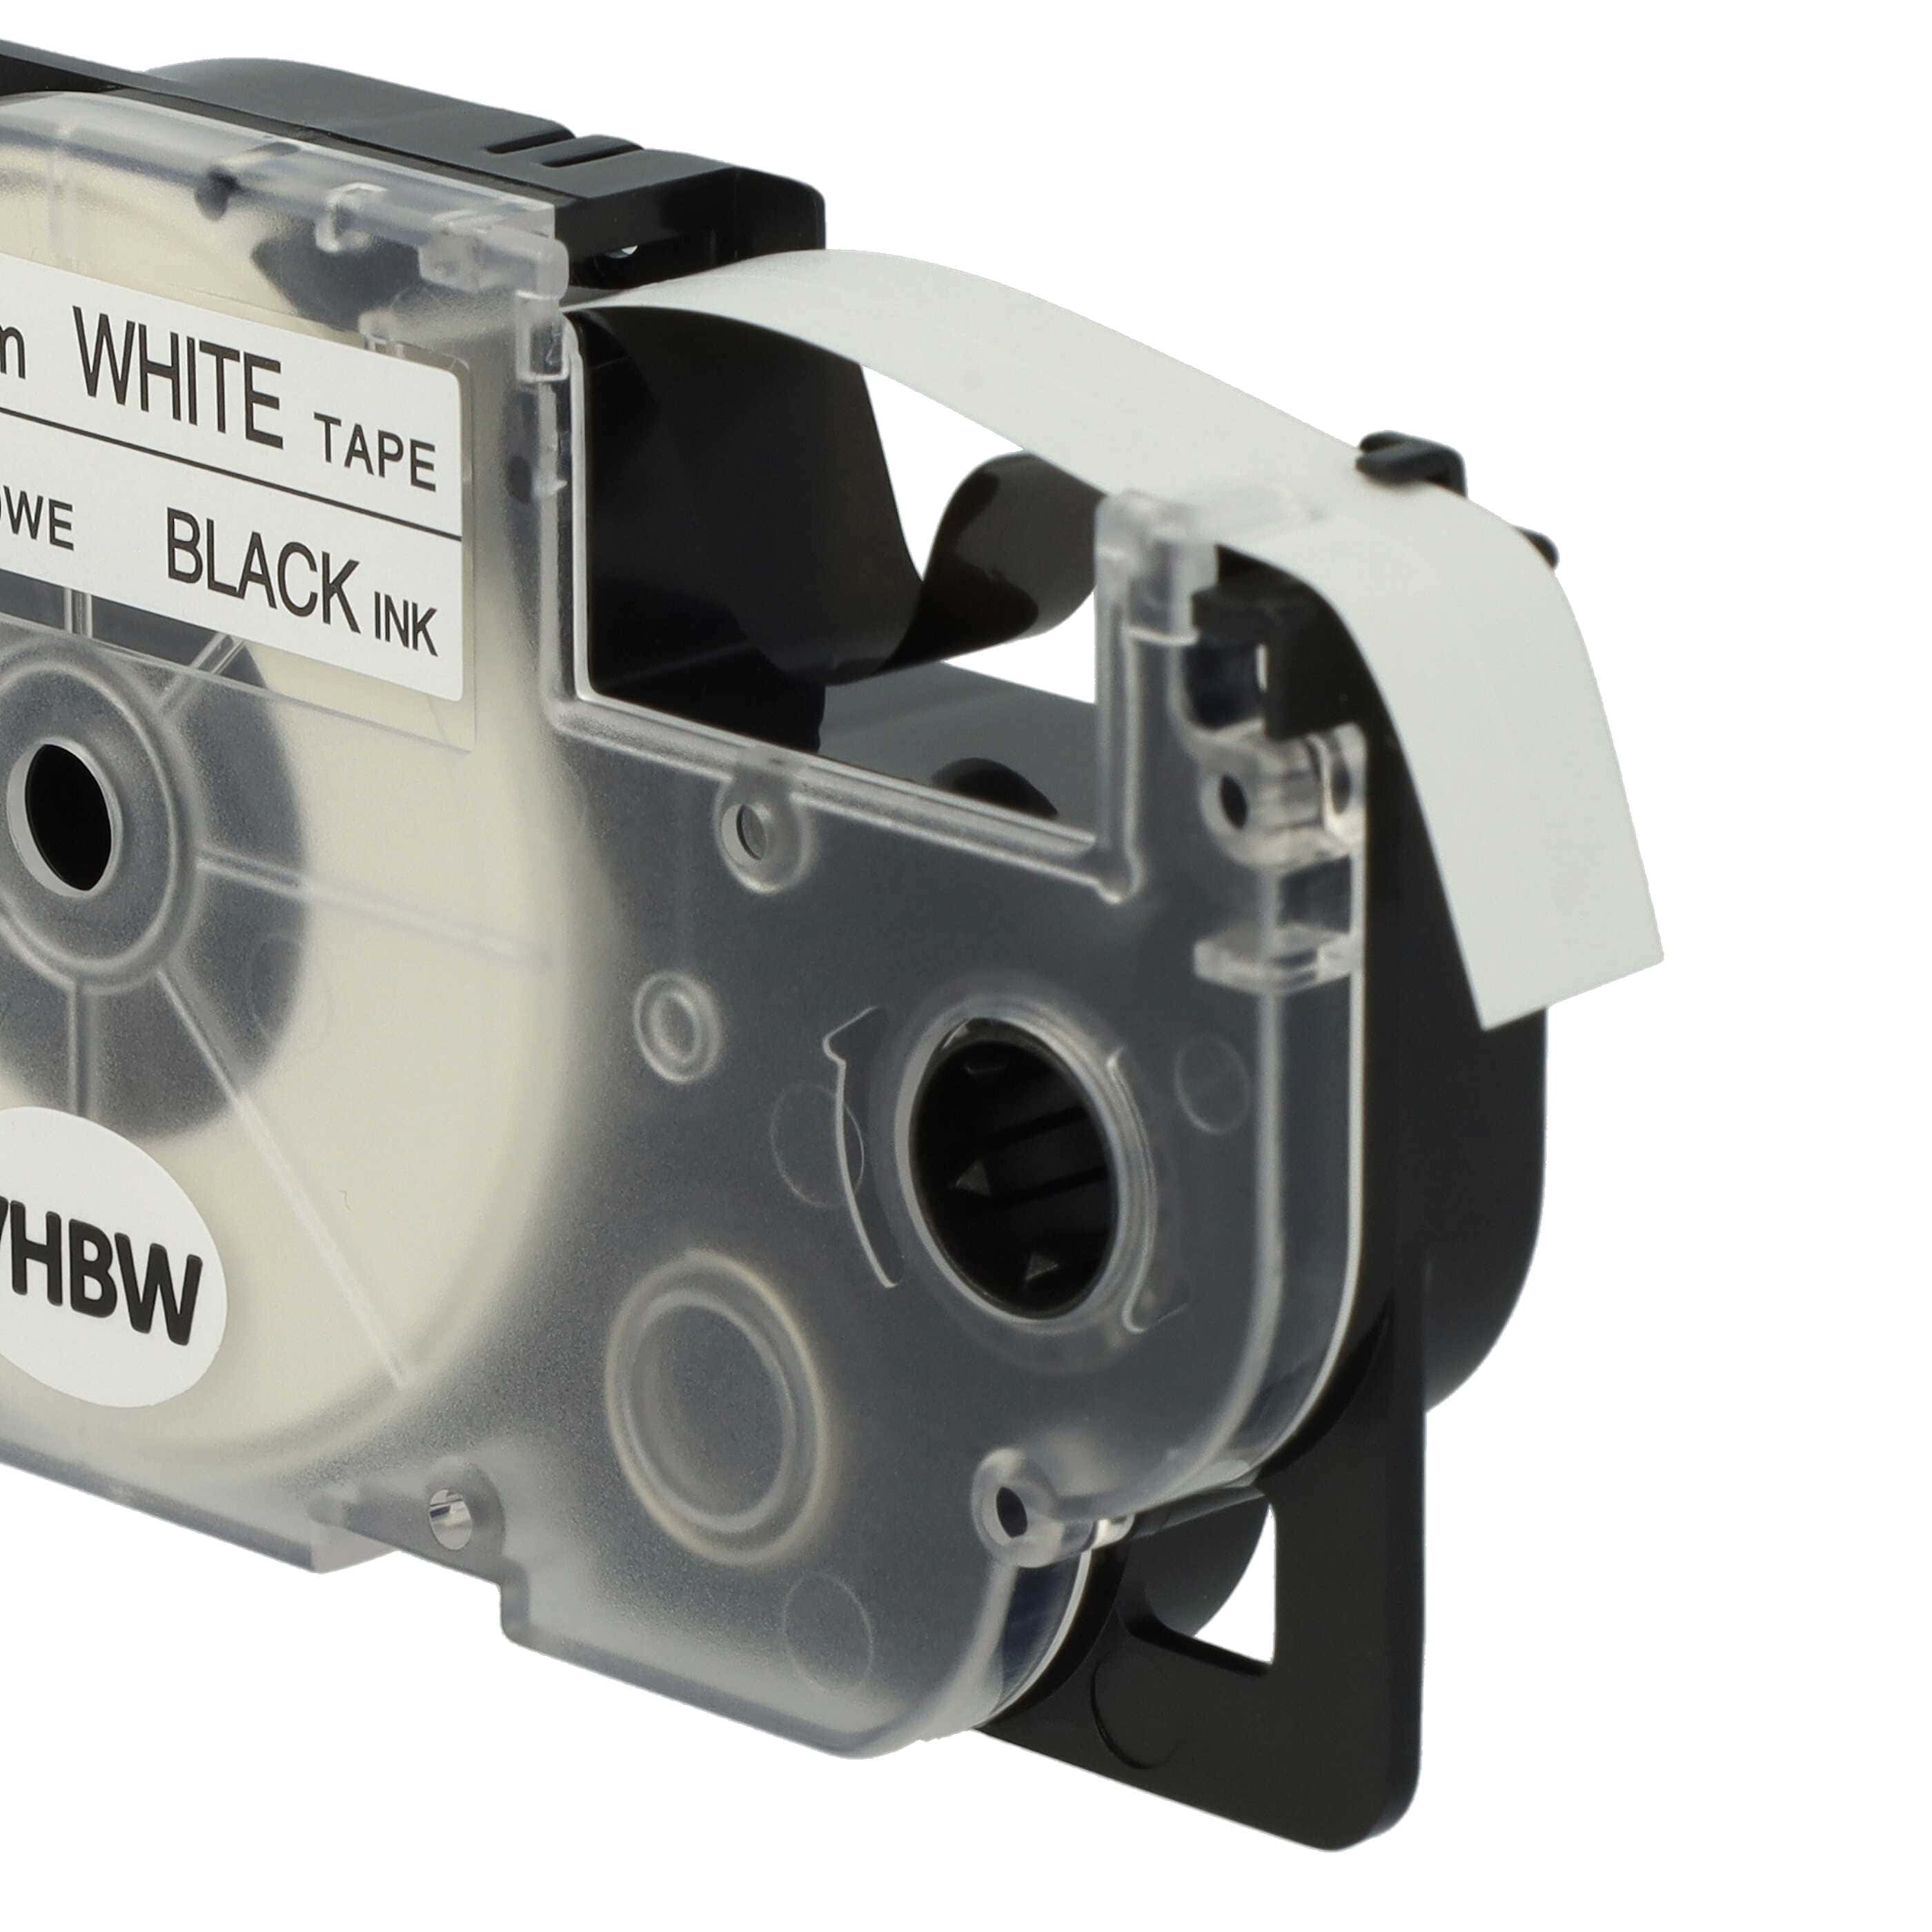 3x Label Tape as Replacement for Casio XR-9WE1, XR-9WE - 9 mm Black to White